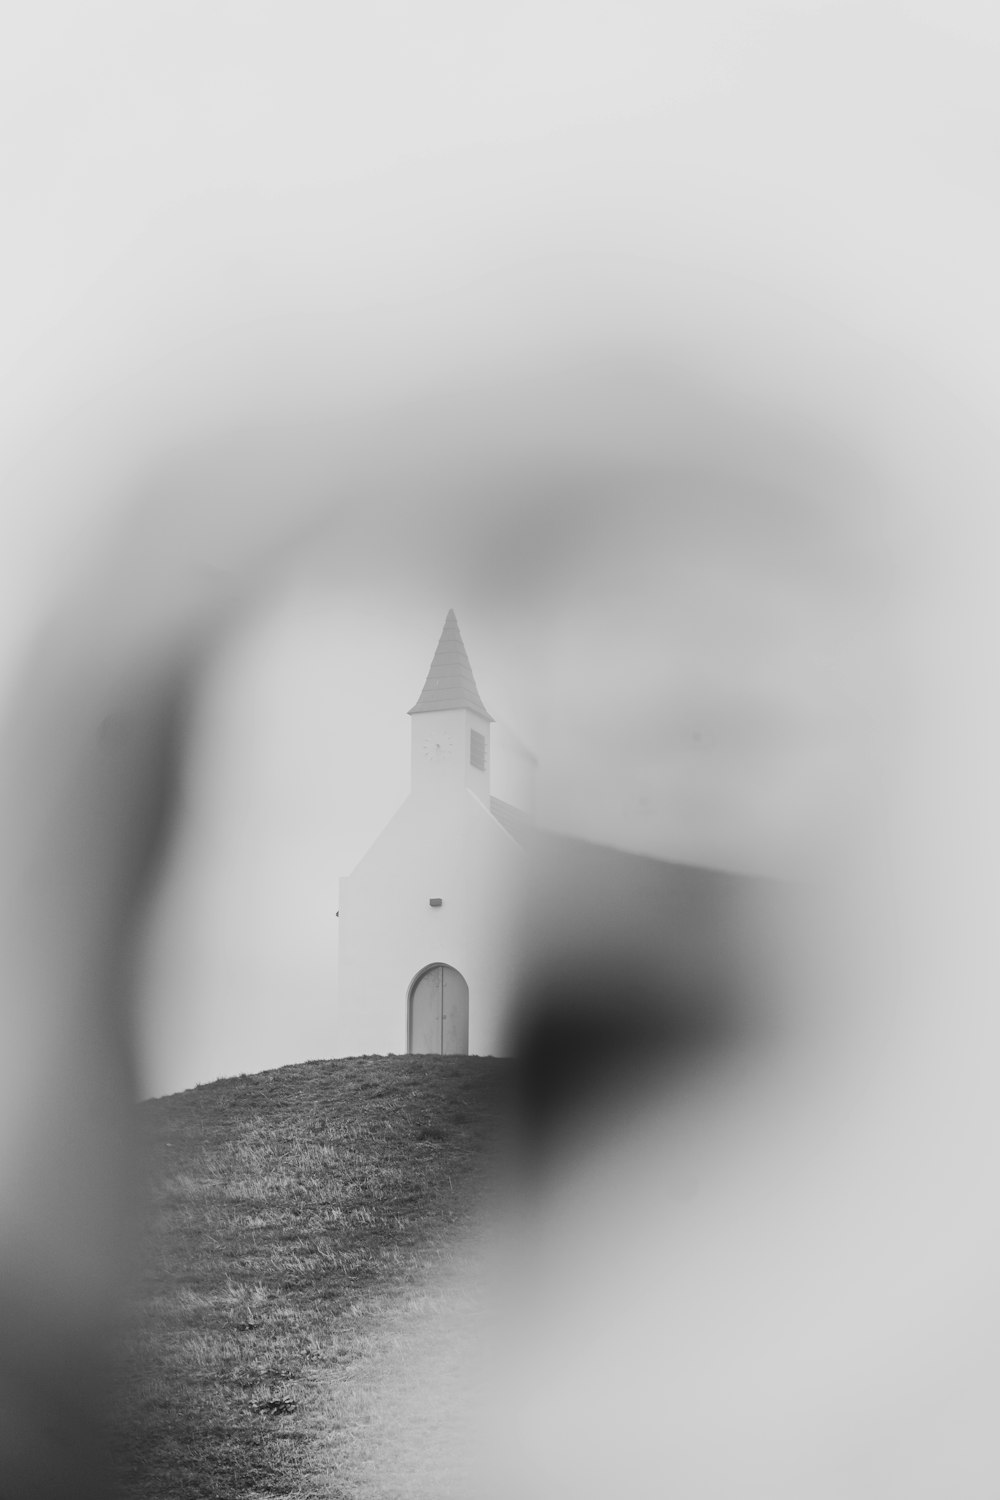 a black and white photo of a church on a hill